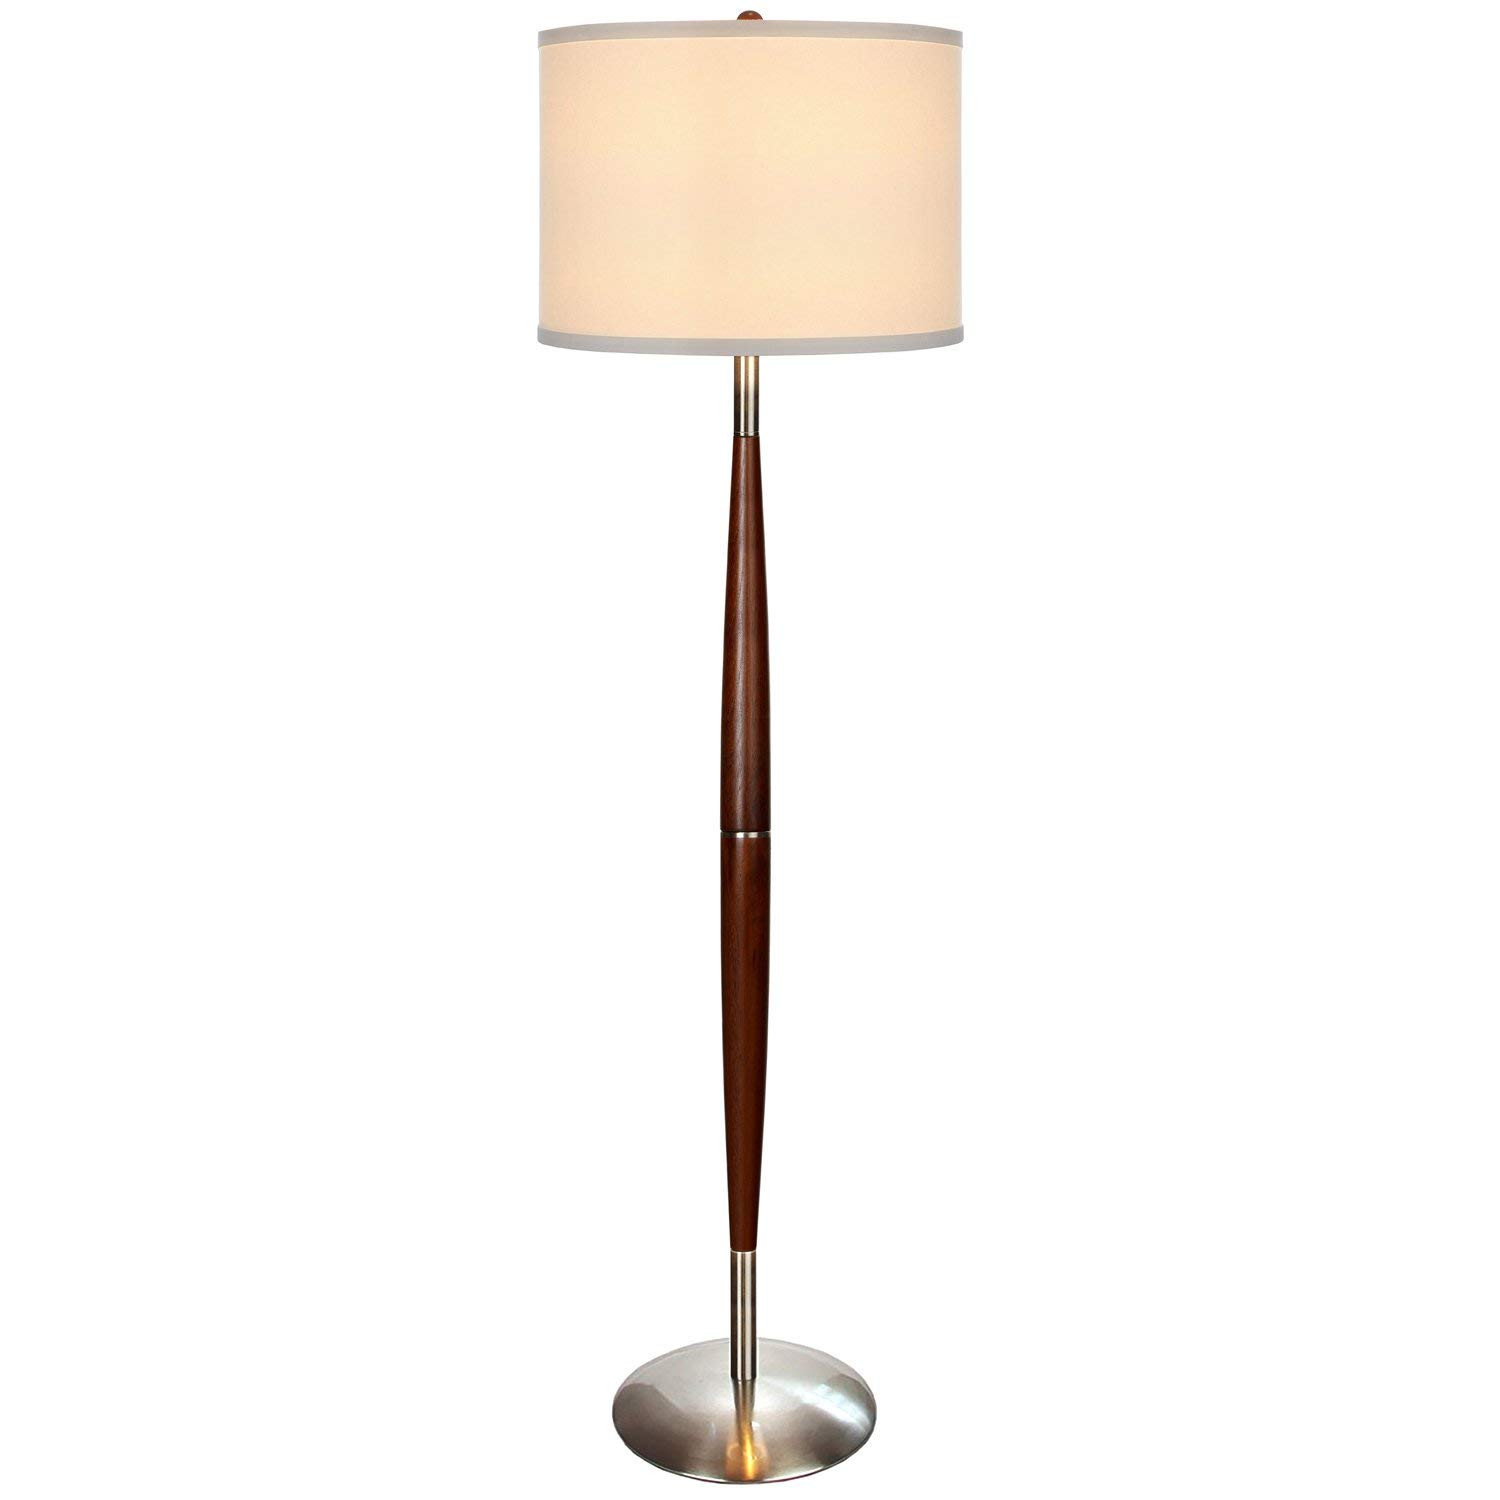 20 attractive 48 Inch Tall Floor Vases 2024 free download 48 inch tall floor vases of brightech lucas led pole floor lamp modern living room light fits with brightech lucas led pole floor lamp modern living room light fits beside the sofa in corner